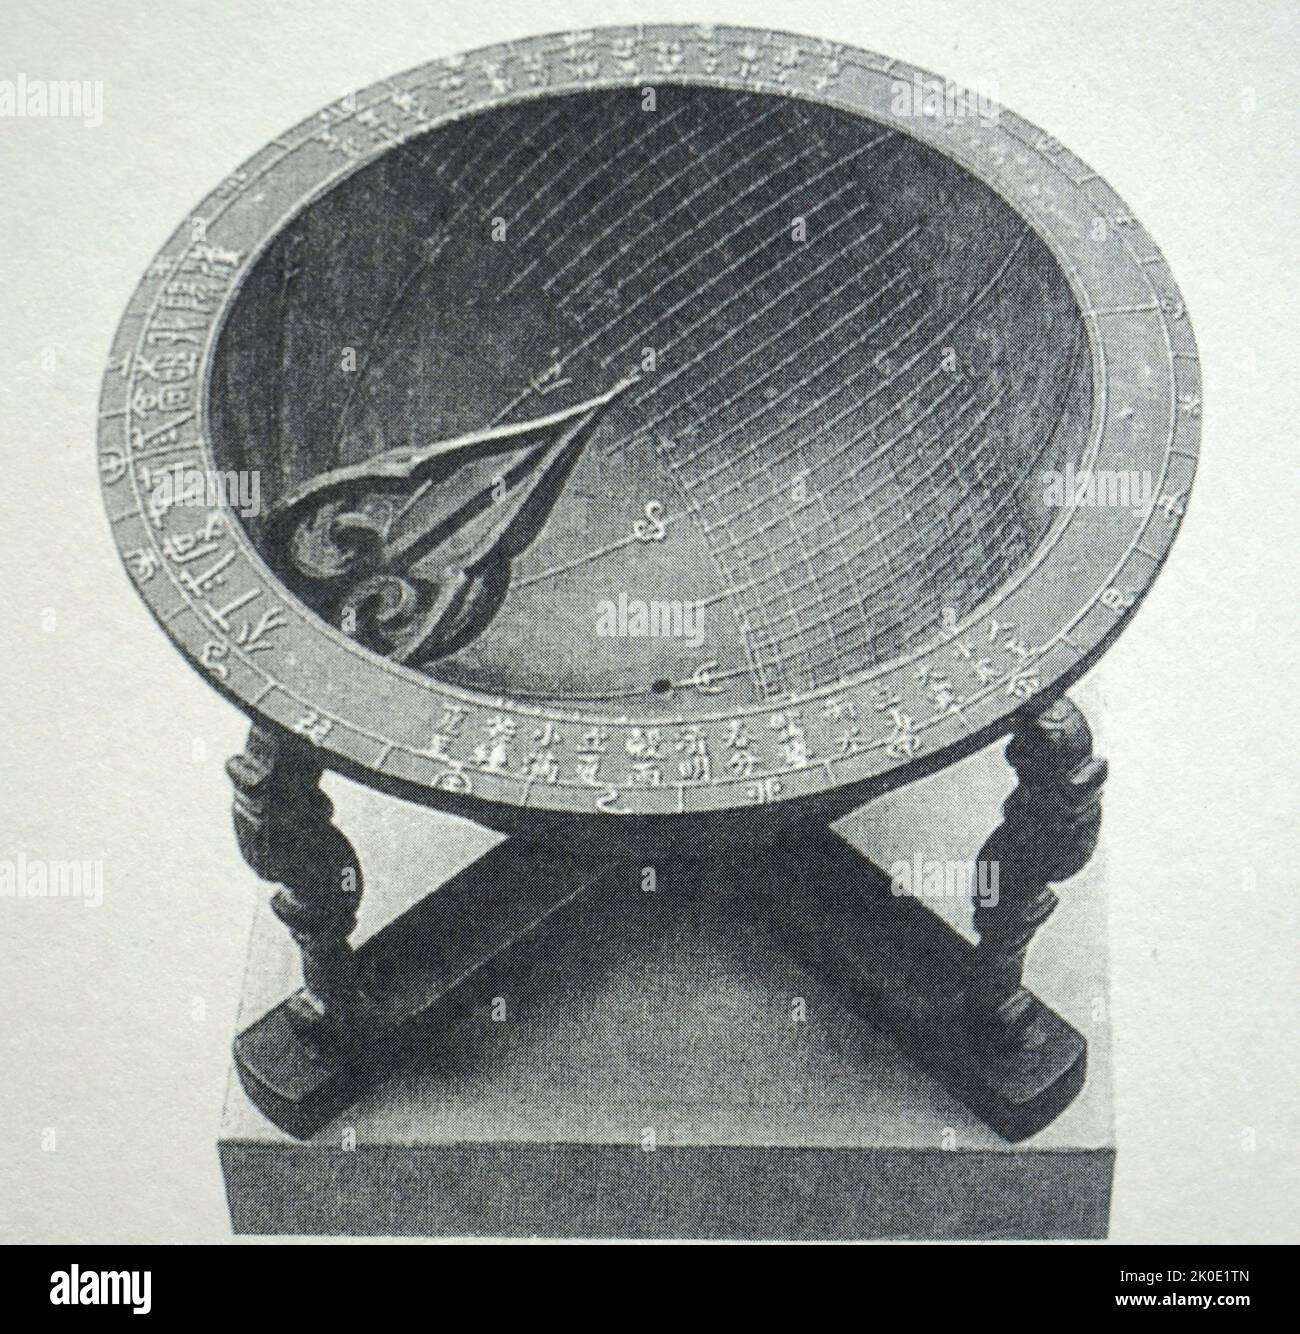 Black and white photo from a book of a Angbu-ilgu, a concave sundial shaped like a hemisphere and was first made 16 years' rule of King Sejong (1434). That was composed of the hour lines, the seasonal lines, sibanmyeon, Yeoungchim and the horizonal surface. Stock Photo